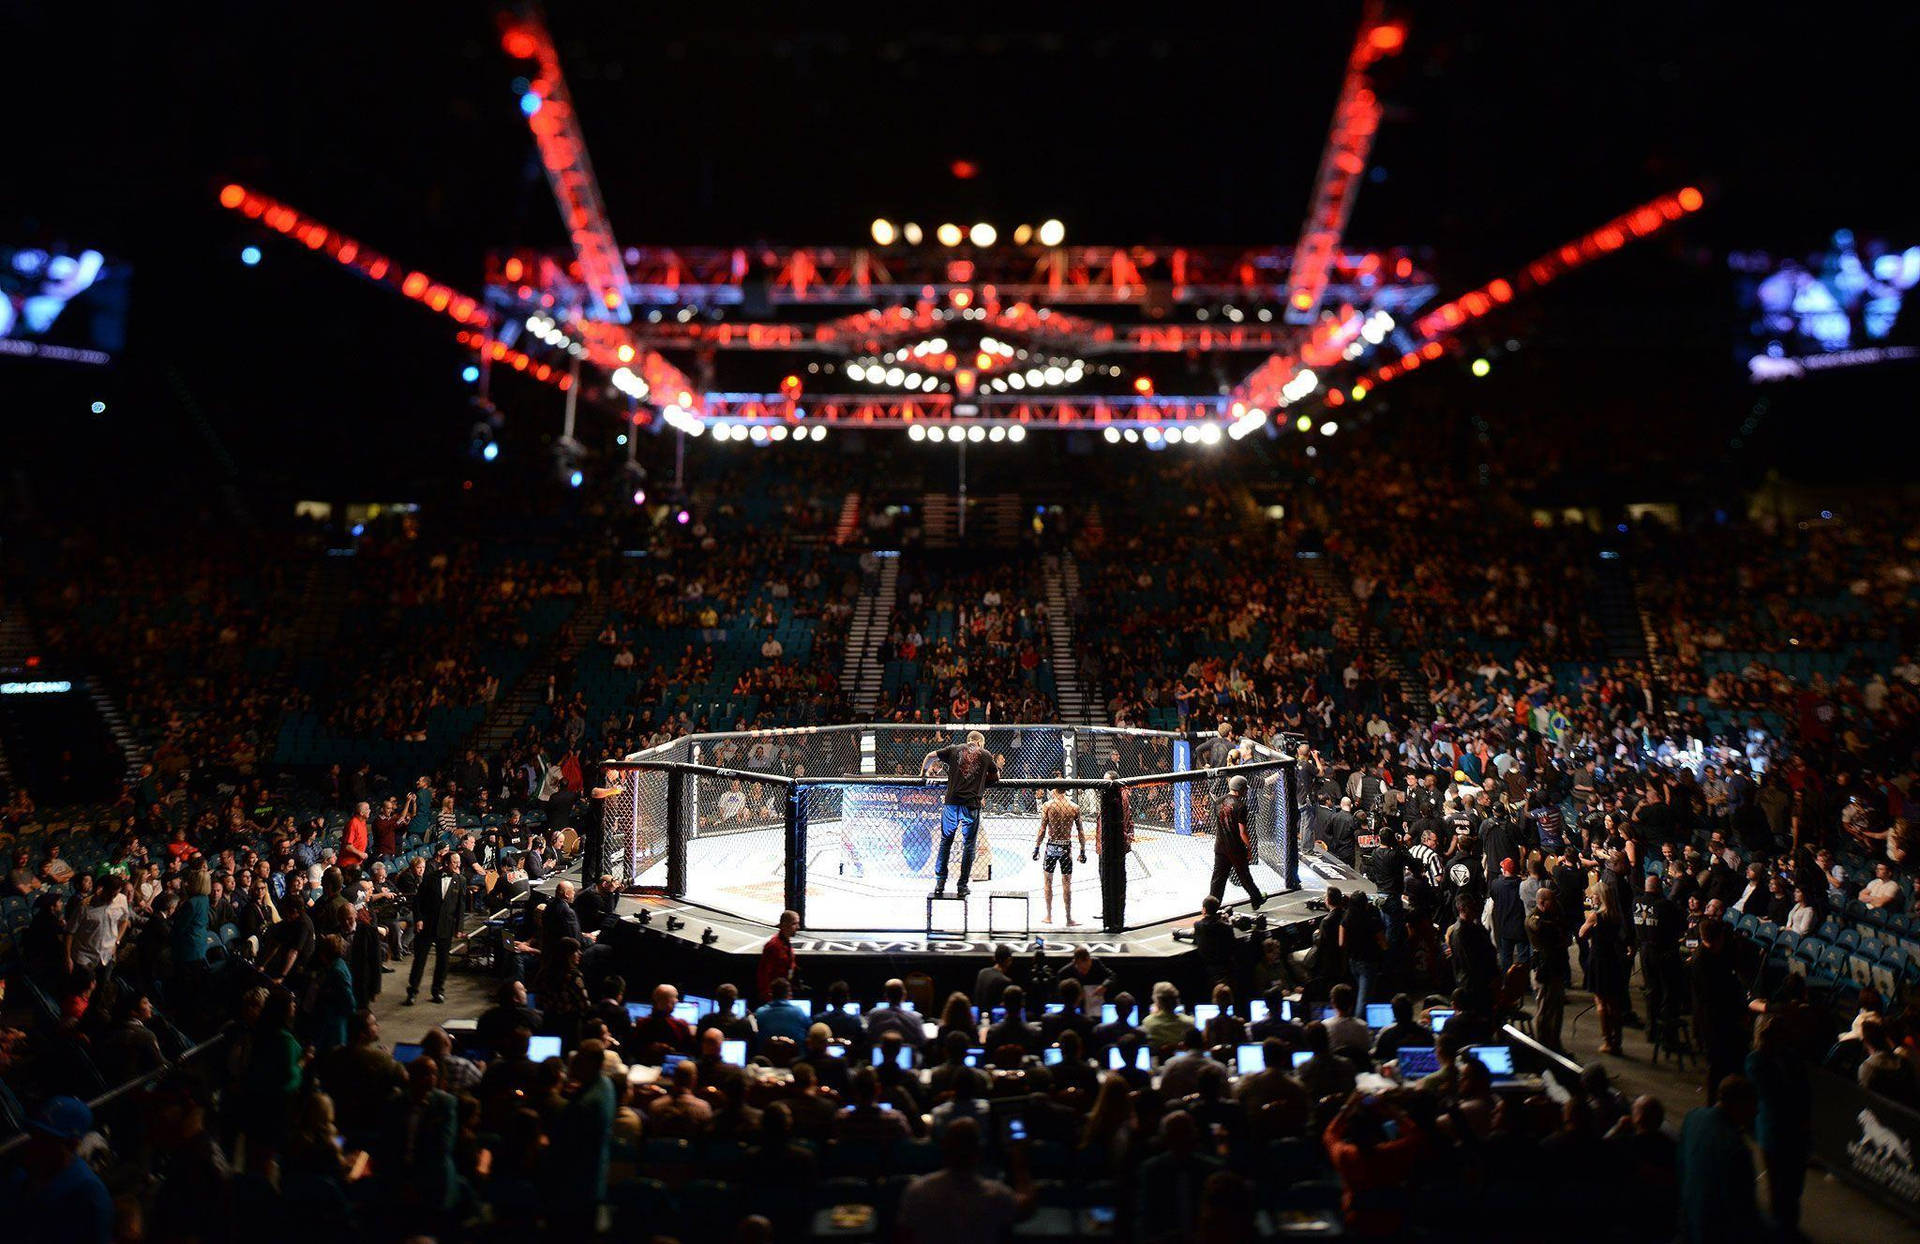 Ufcarena 4k In Spanish Would Be 